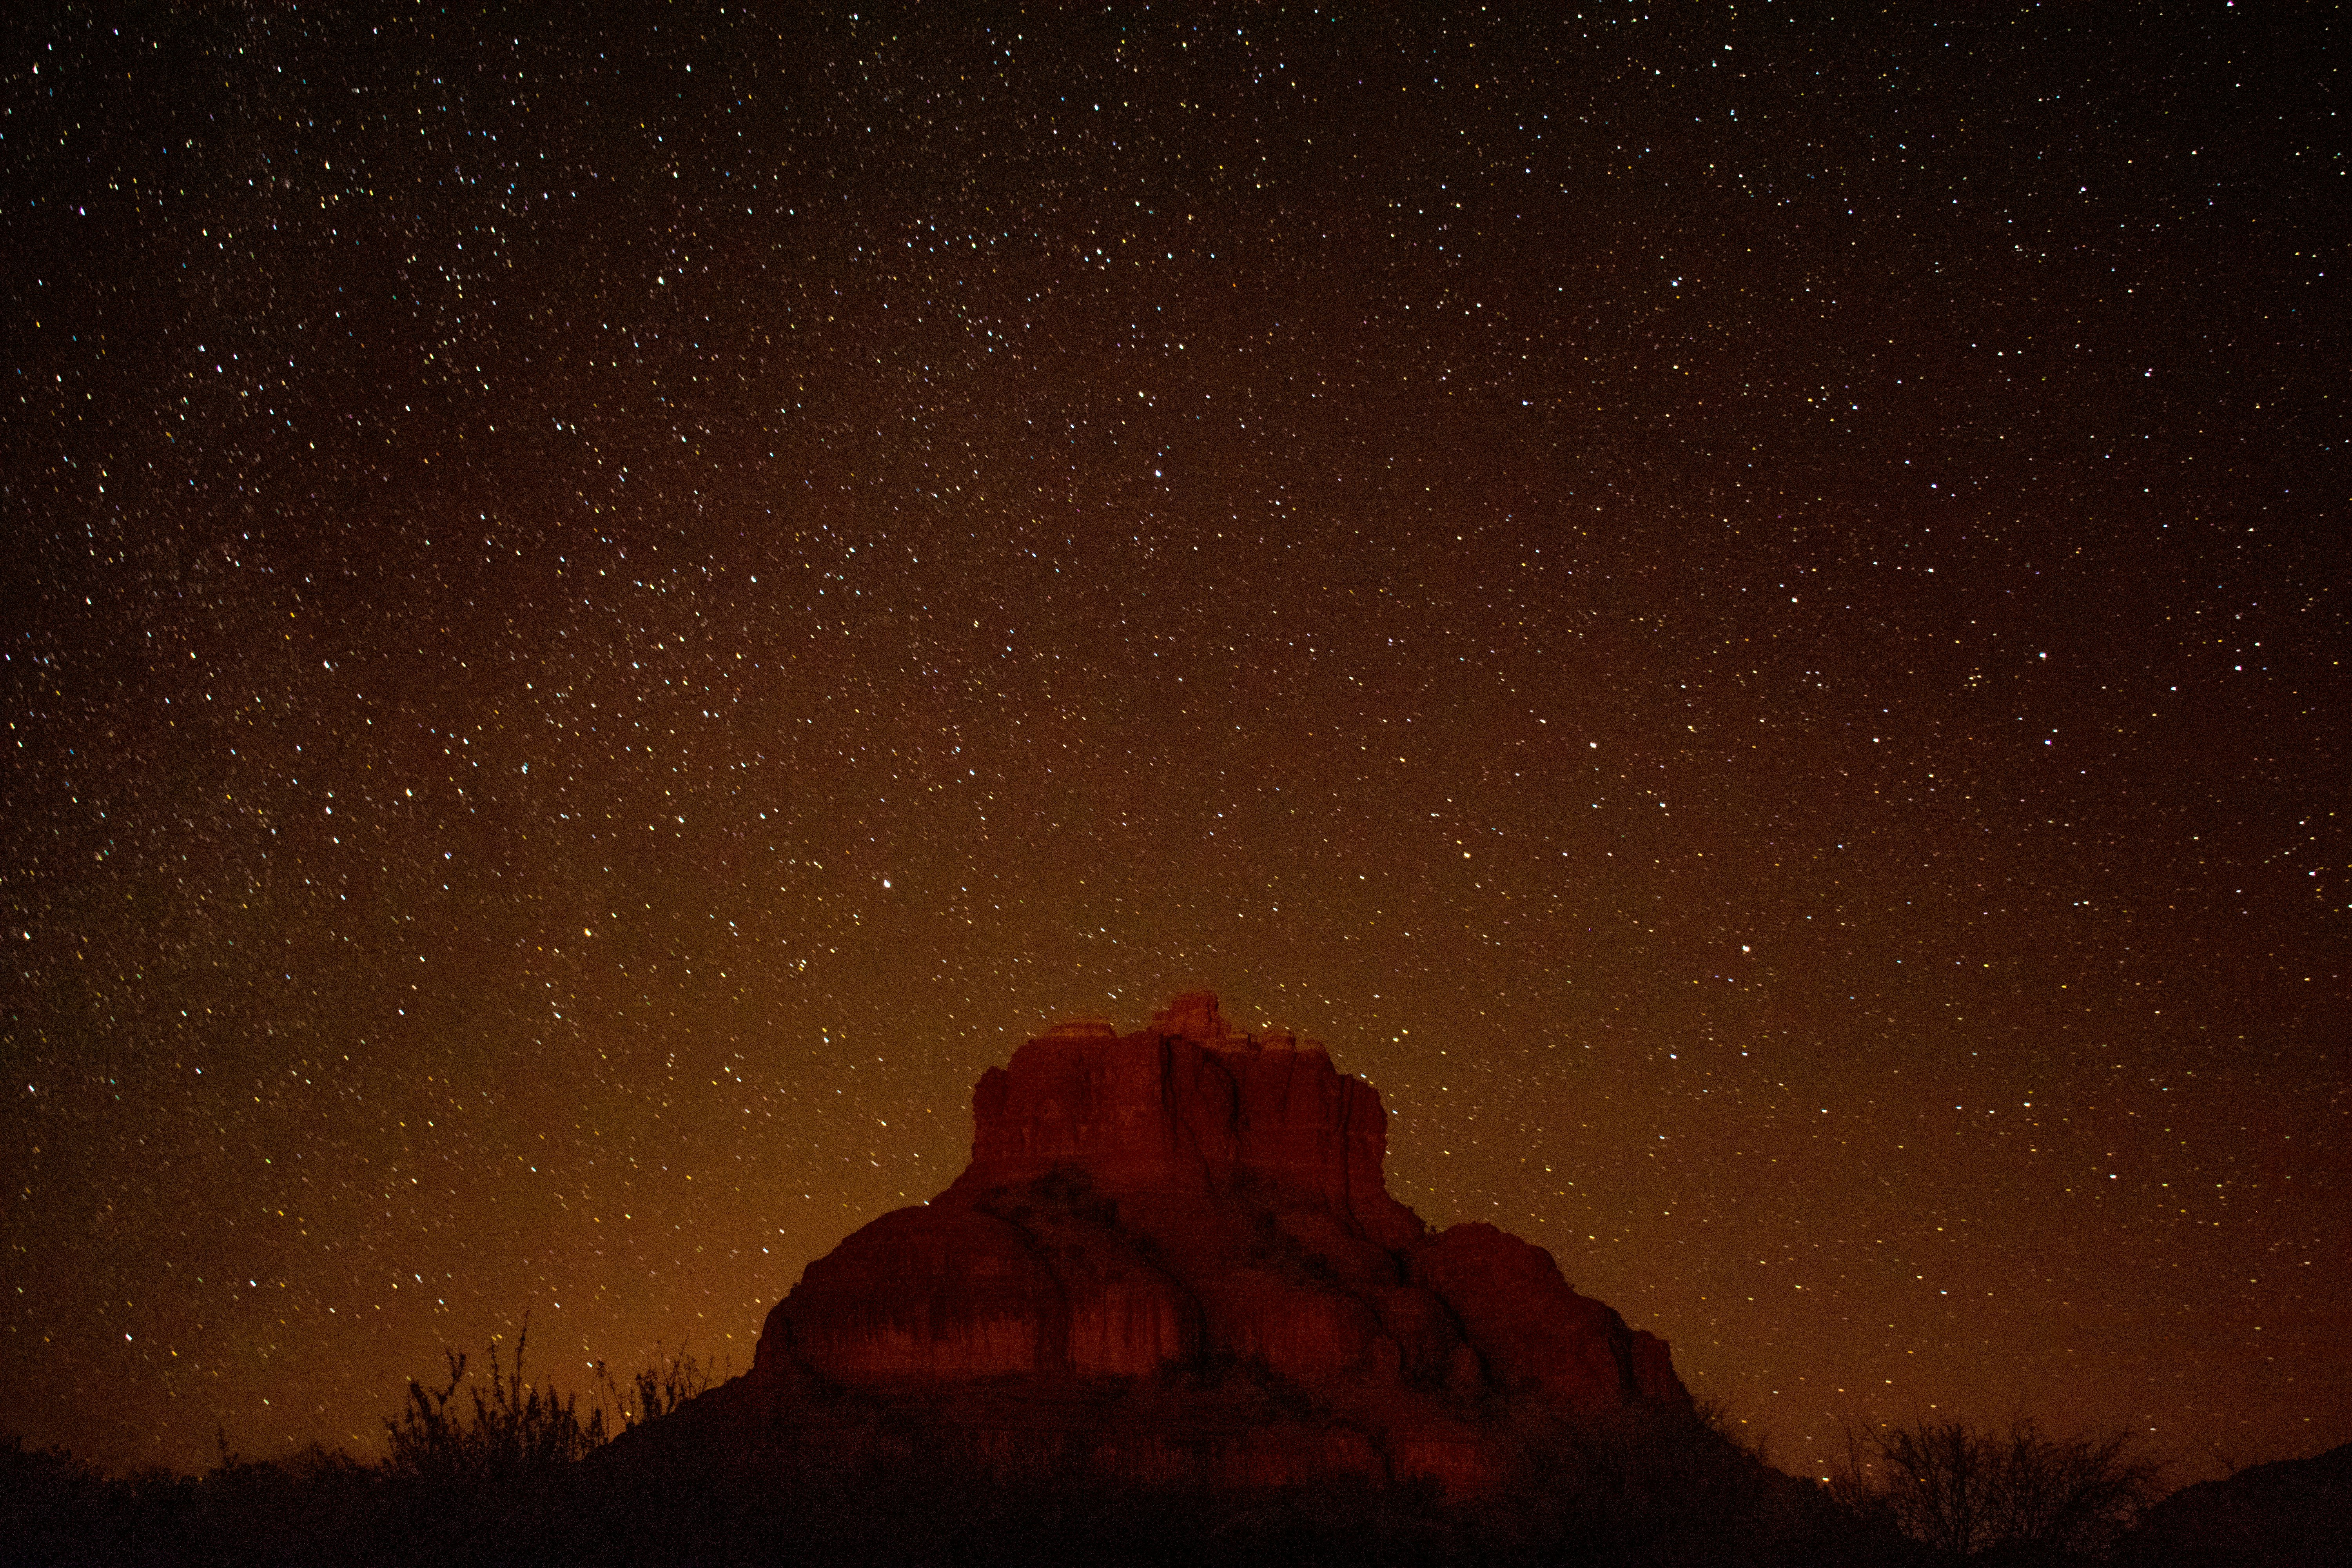 brown mountain under starry sky during nighttime in timelapse photography